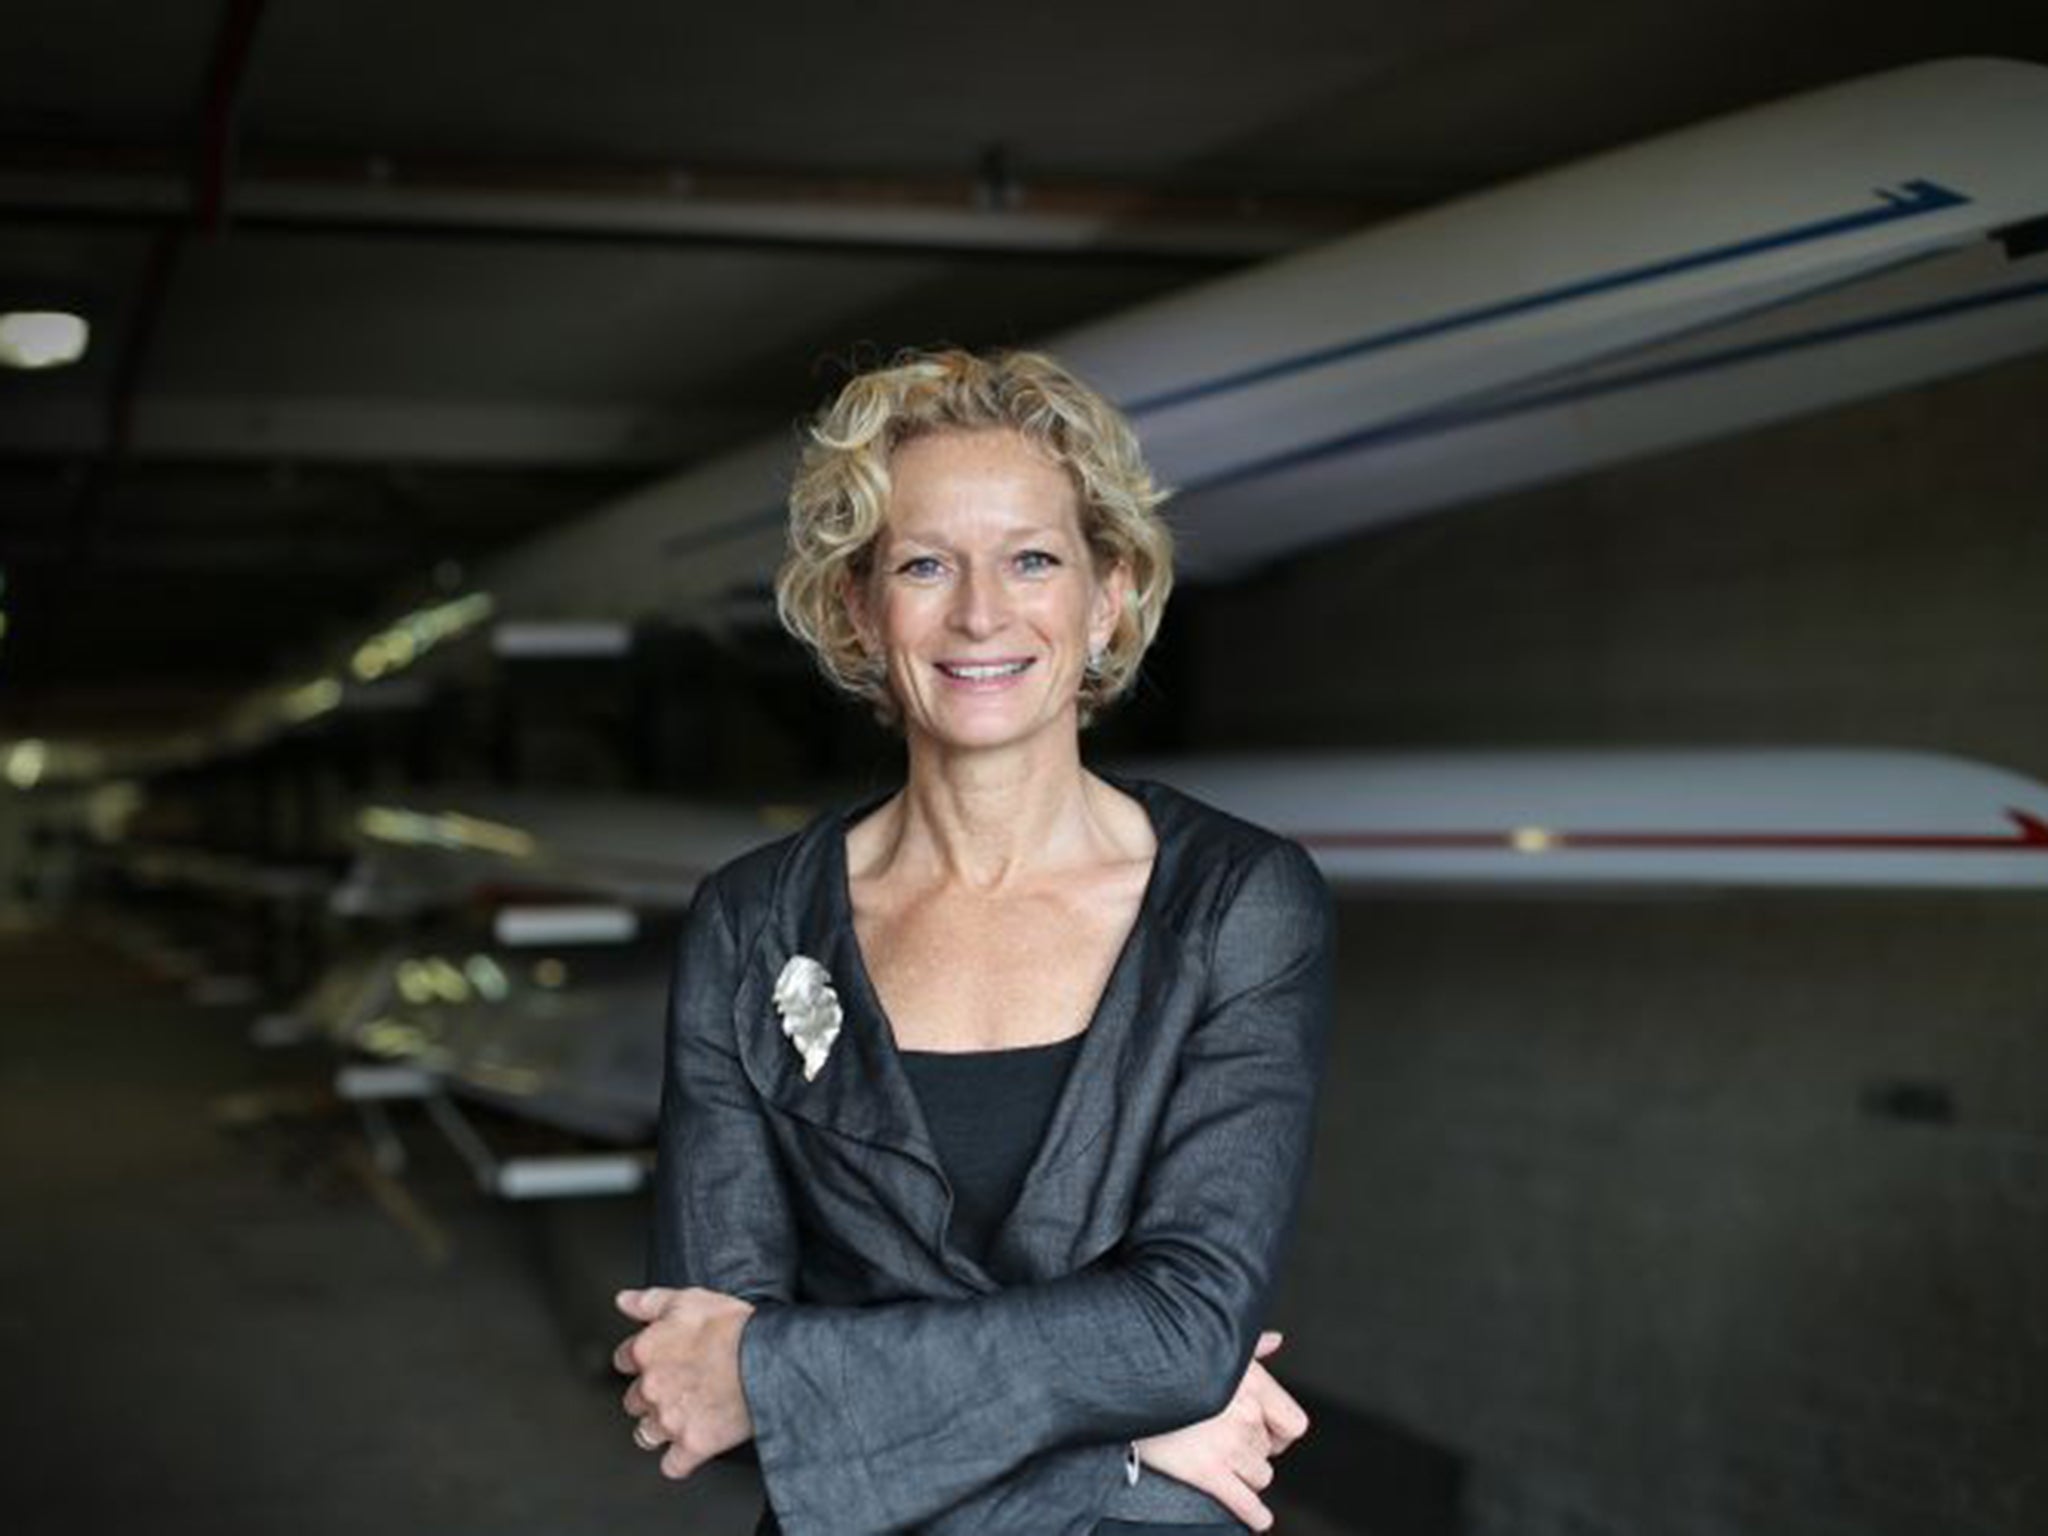 Chair of British Rowing Annamarie Phelps: ‘At European level, often I’m the only woman in the room’